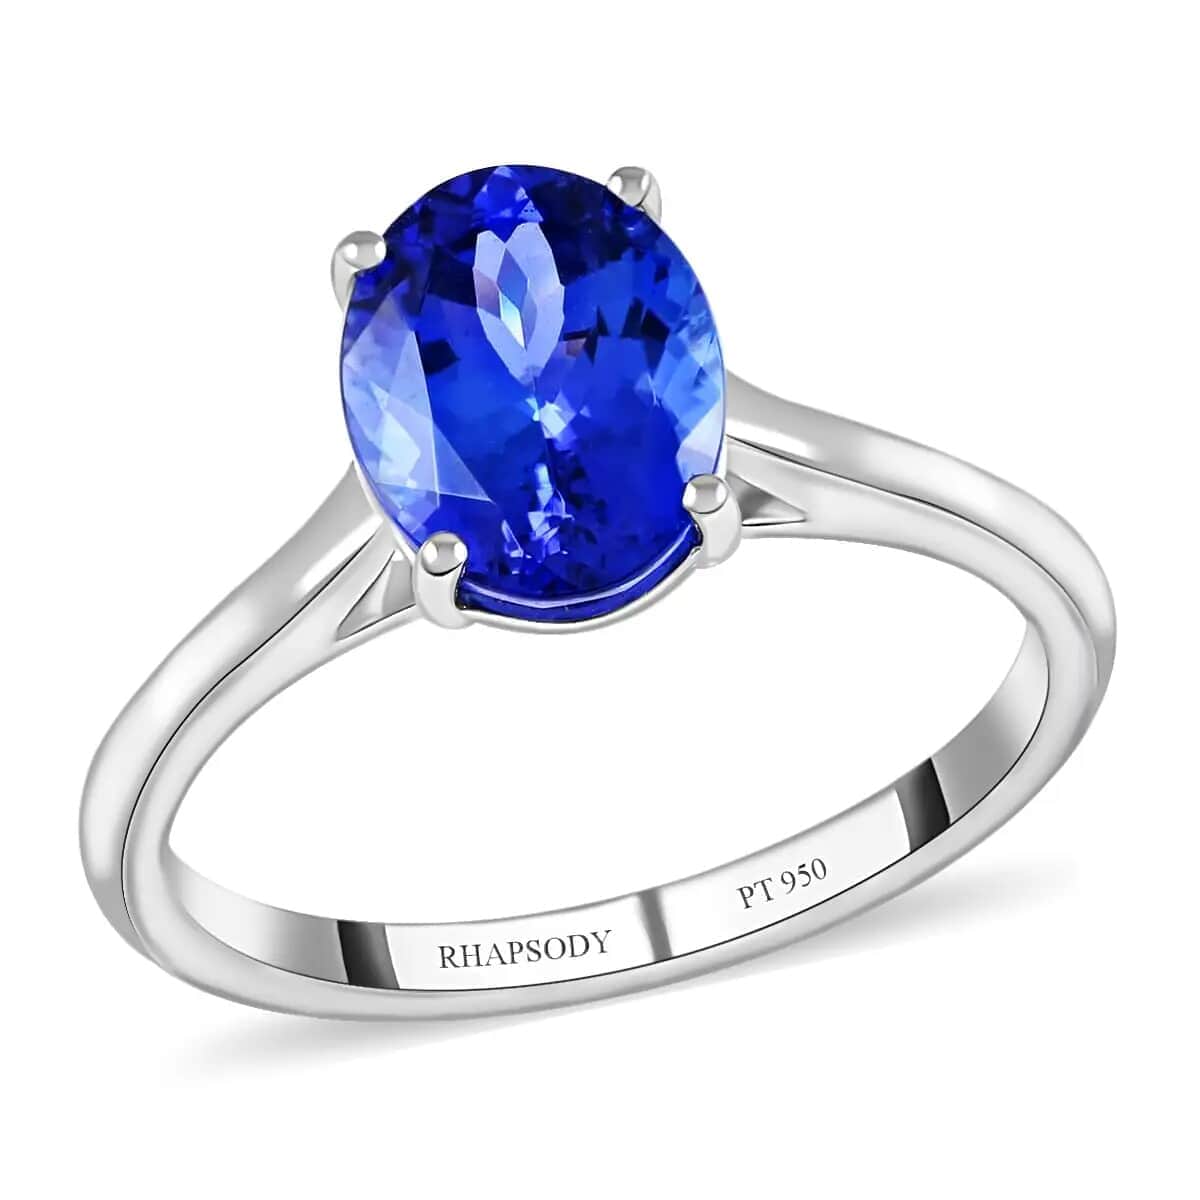 Doorbuster Certified and Appraised RHAPSODY 950 Platinum AAAA Tanzanite Solitaire Ring 4.10 Grams 2.35 ctw image number 0